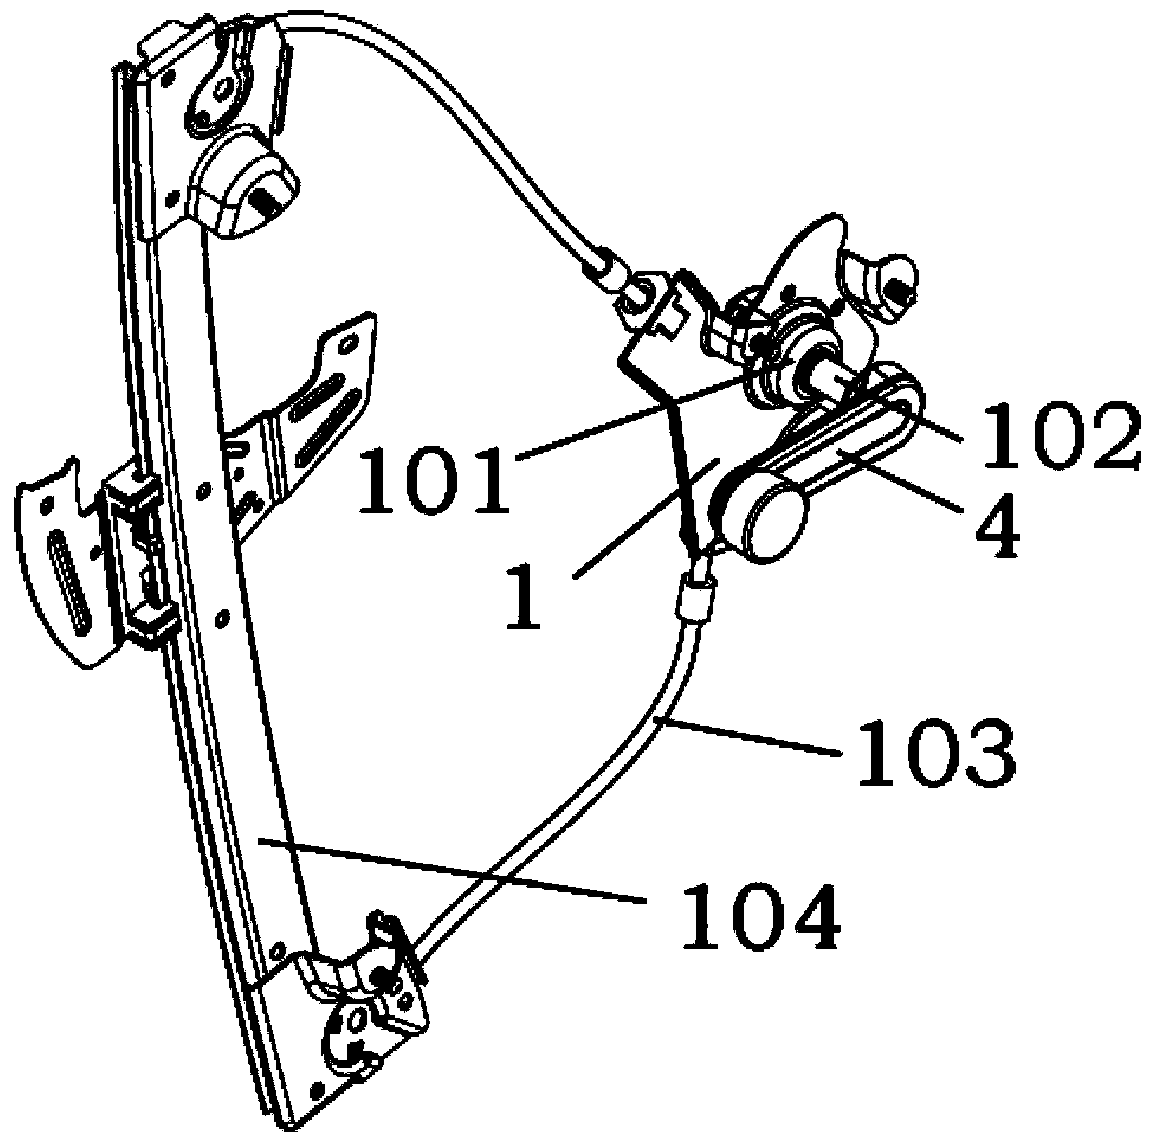 Rope wheel type glass lifter